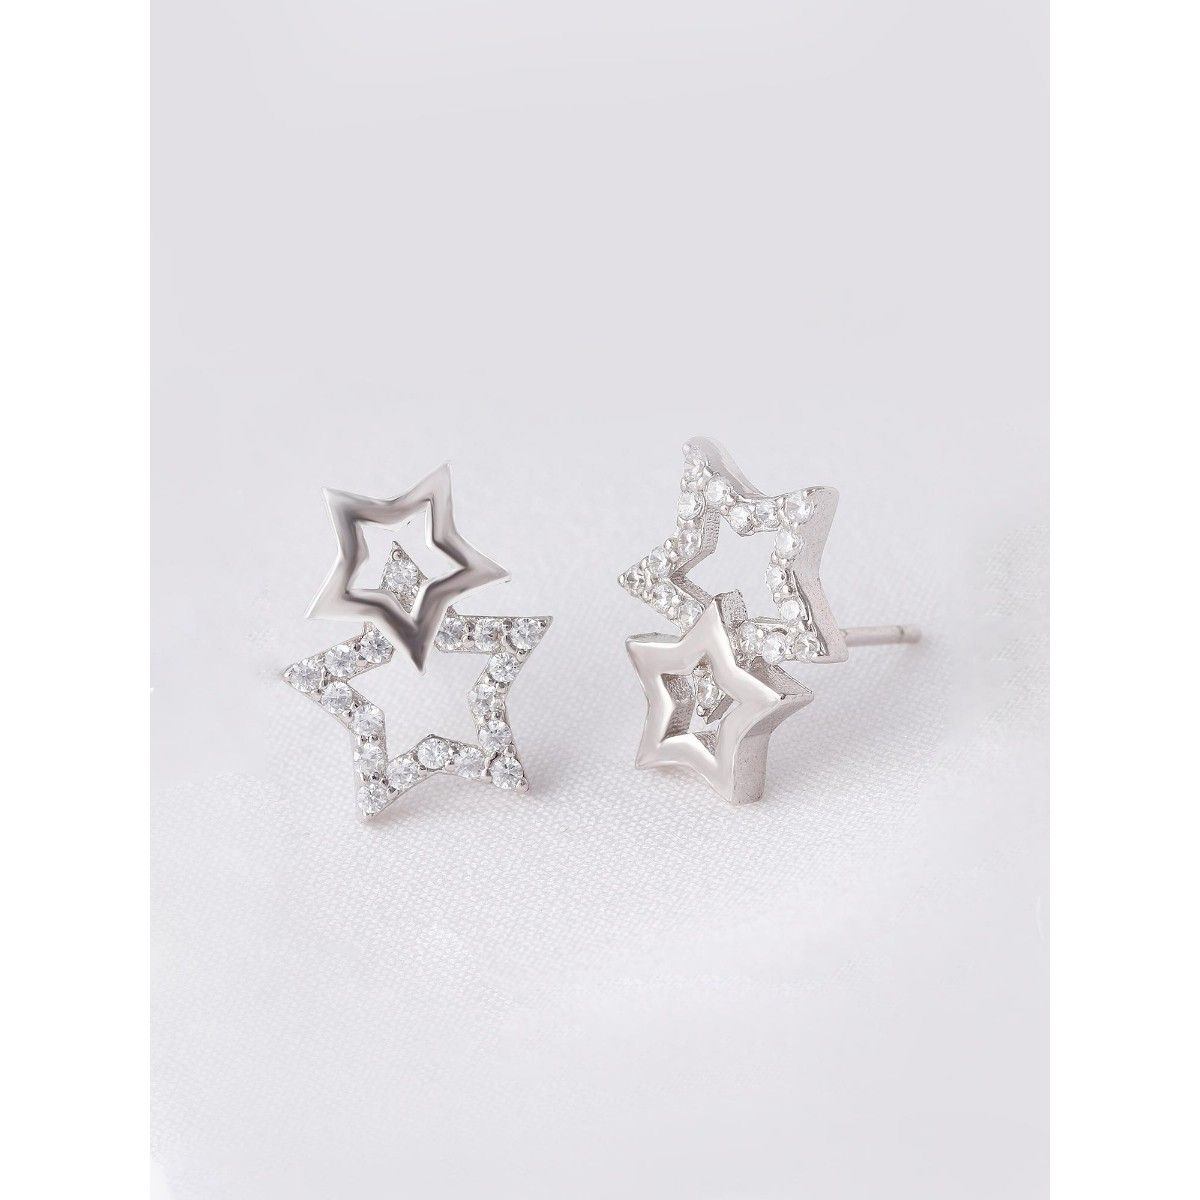 Aggregate 84+ star earrings sterling silver latest